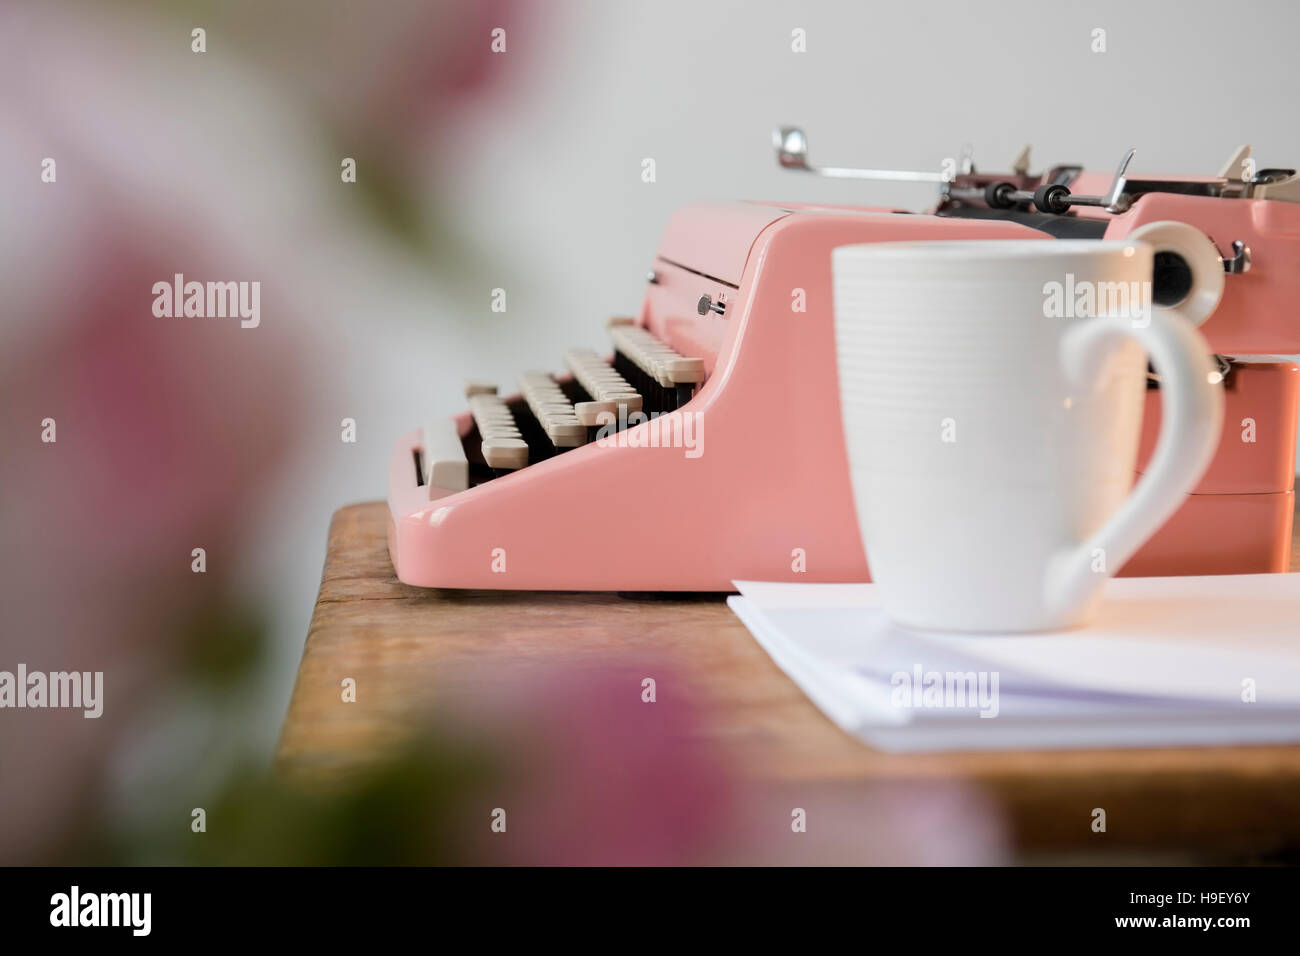 Coffee cup on pile of paper near pink typewriter Stock Photo